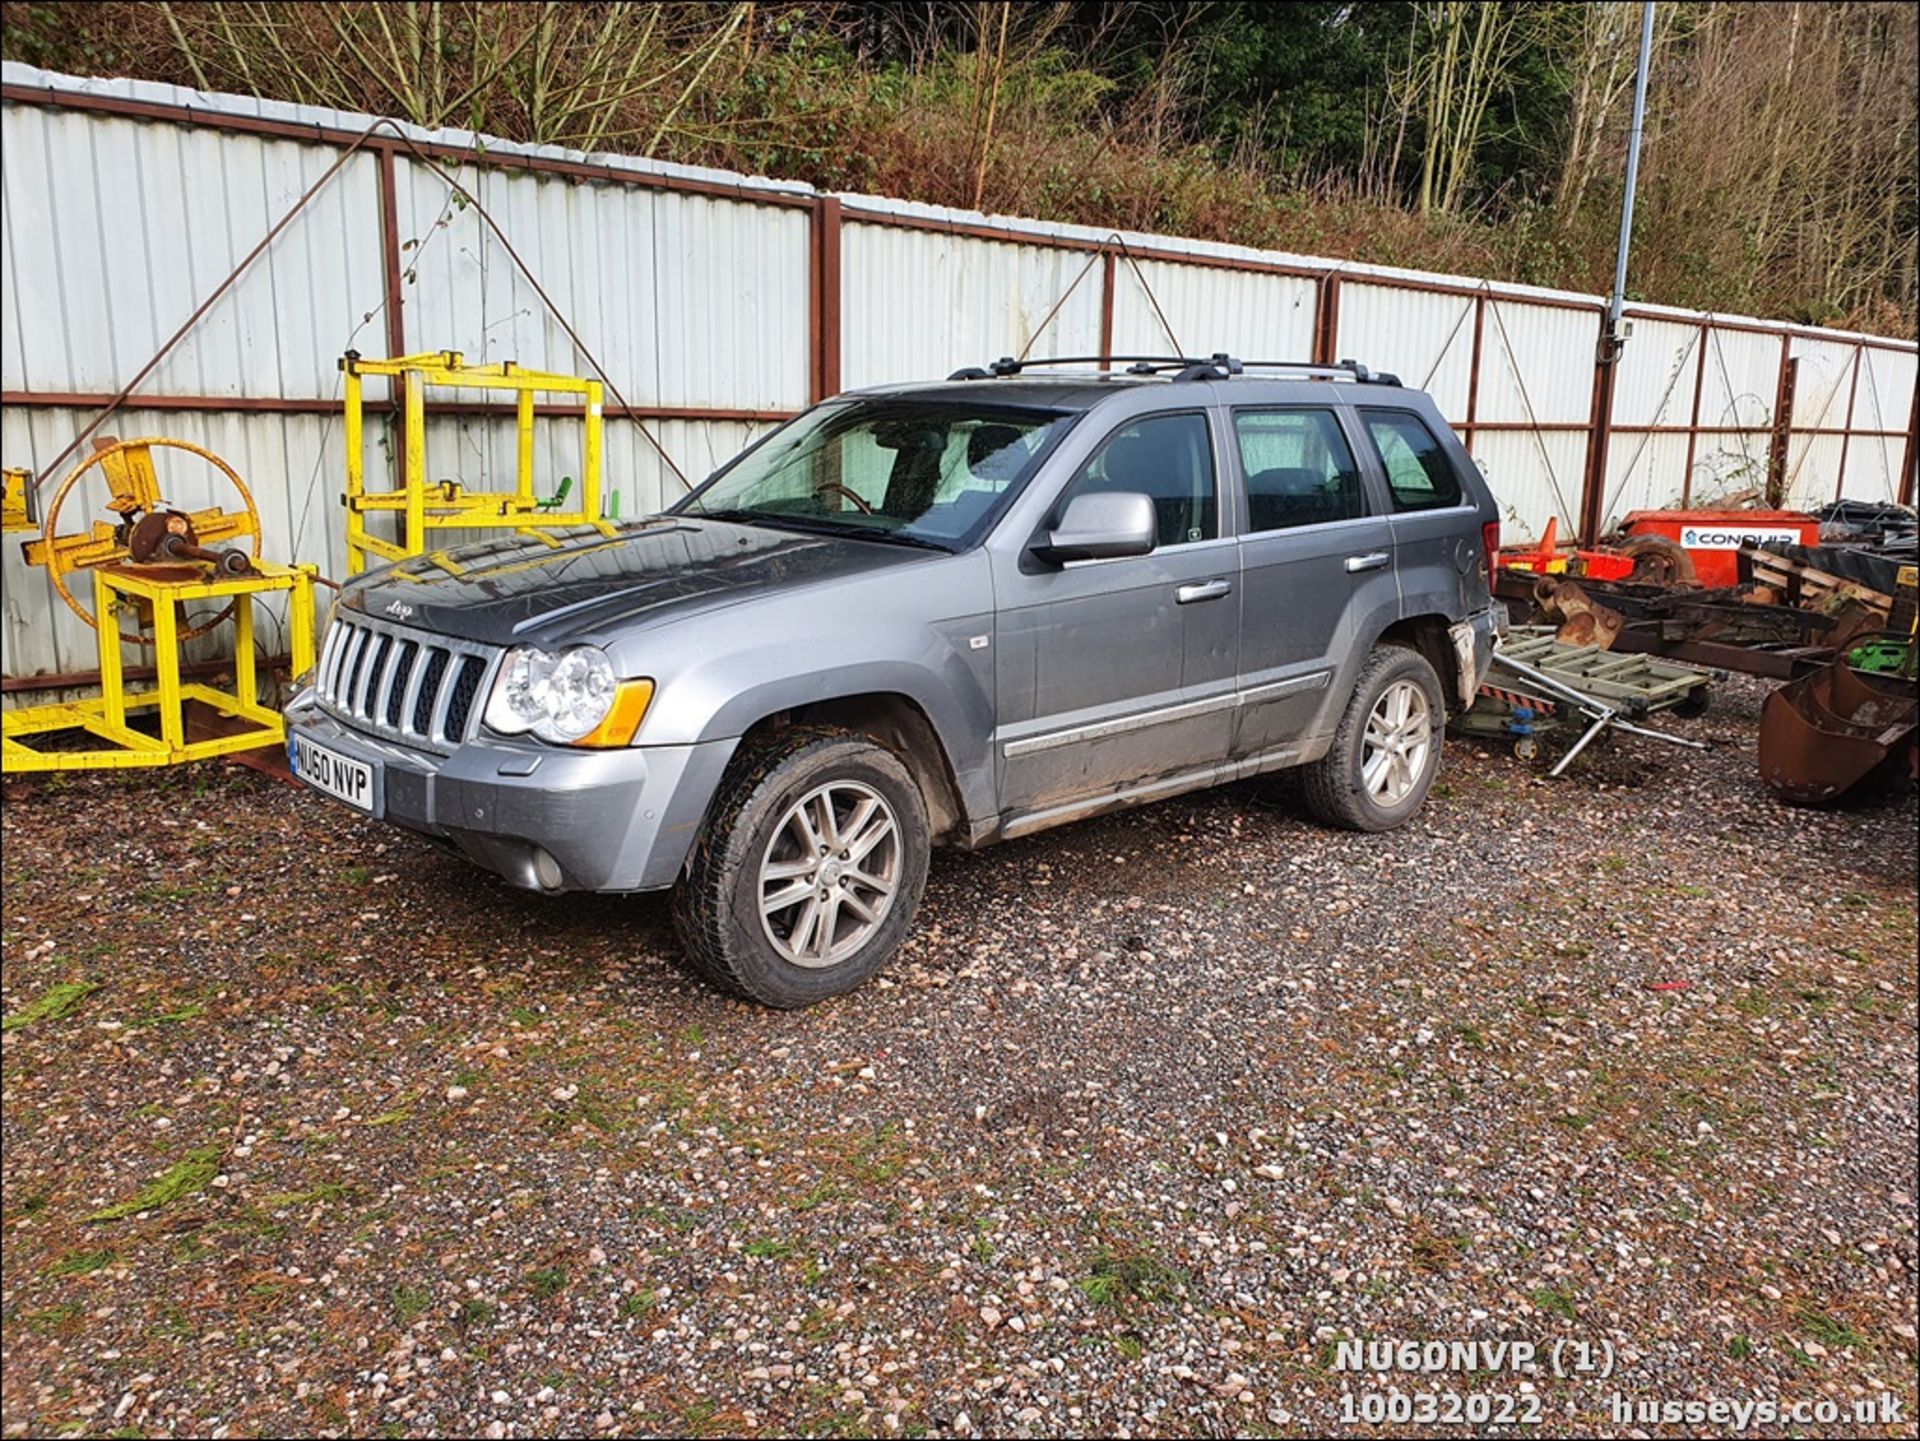 10/60 JEEP G-CHEROKEE OVERLAND CRD A - 2987cc 5dr Estate (Grey, 154k) - Image 2 of 47